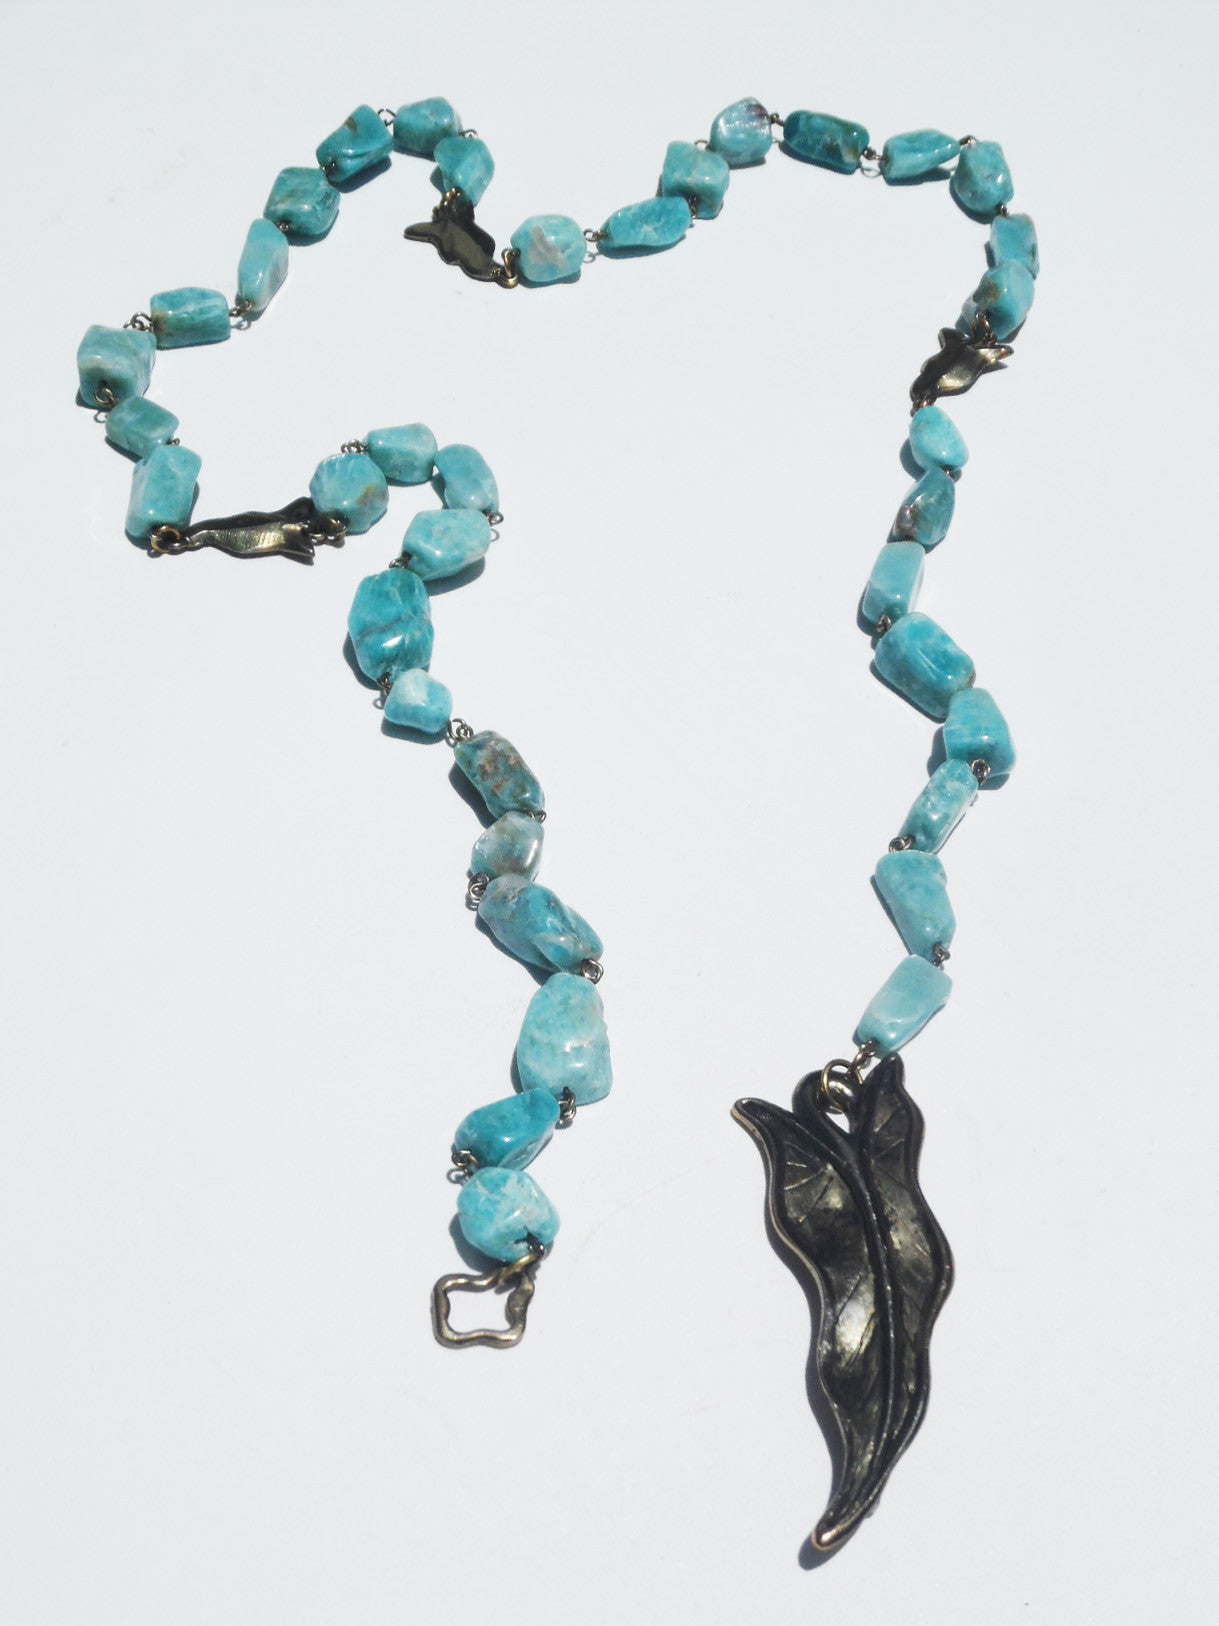 Necklace Or Chain Belt Amazonite With Leaf